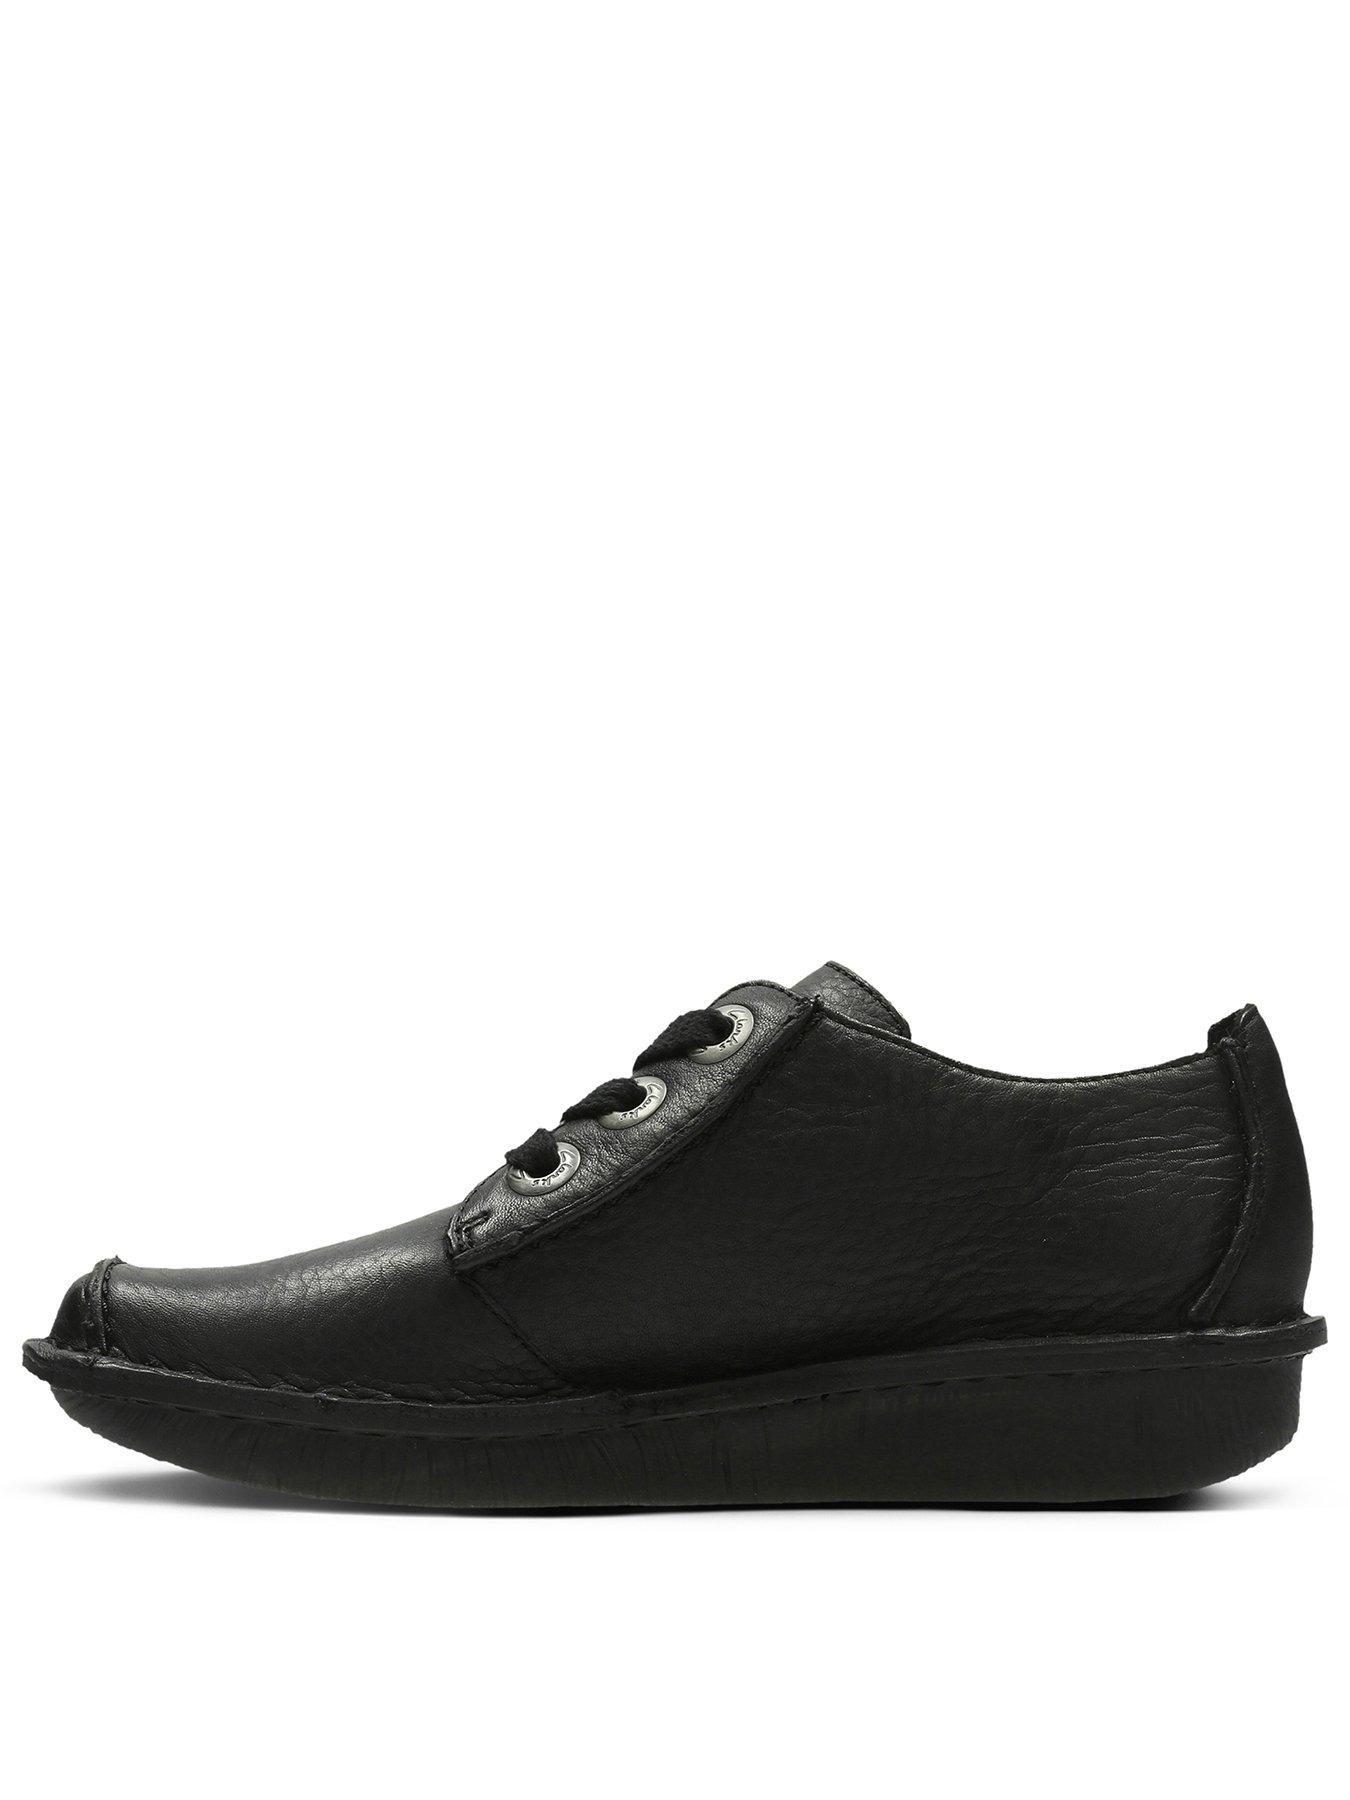 Clarks Funny Dream Lace Shoe - Black very.co.uk